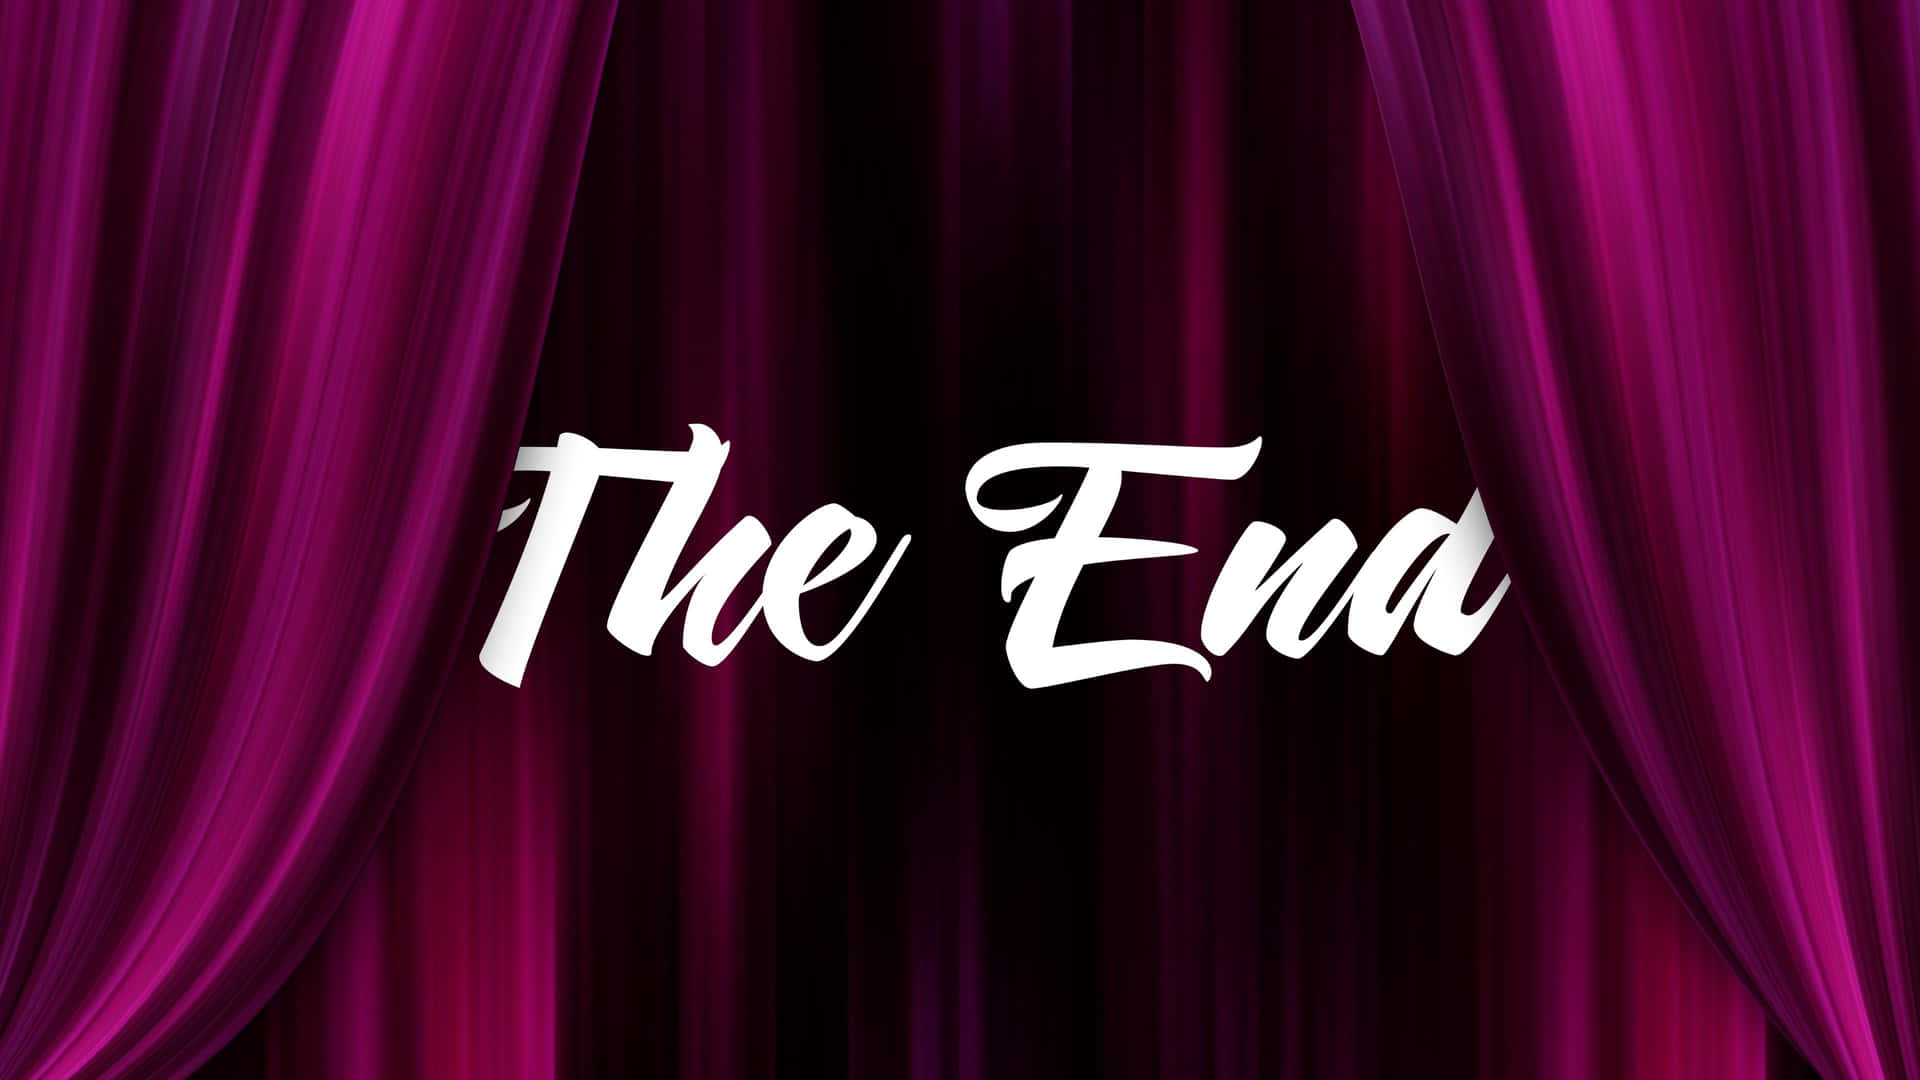 The End Of The Road Background